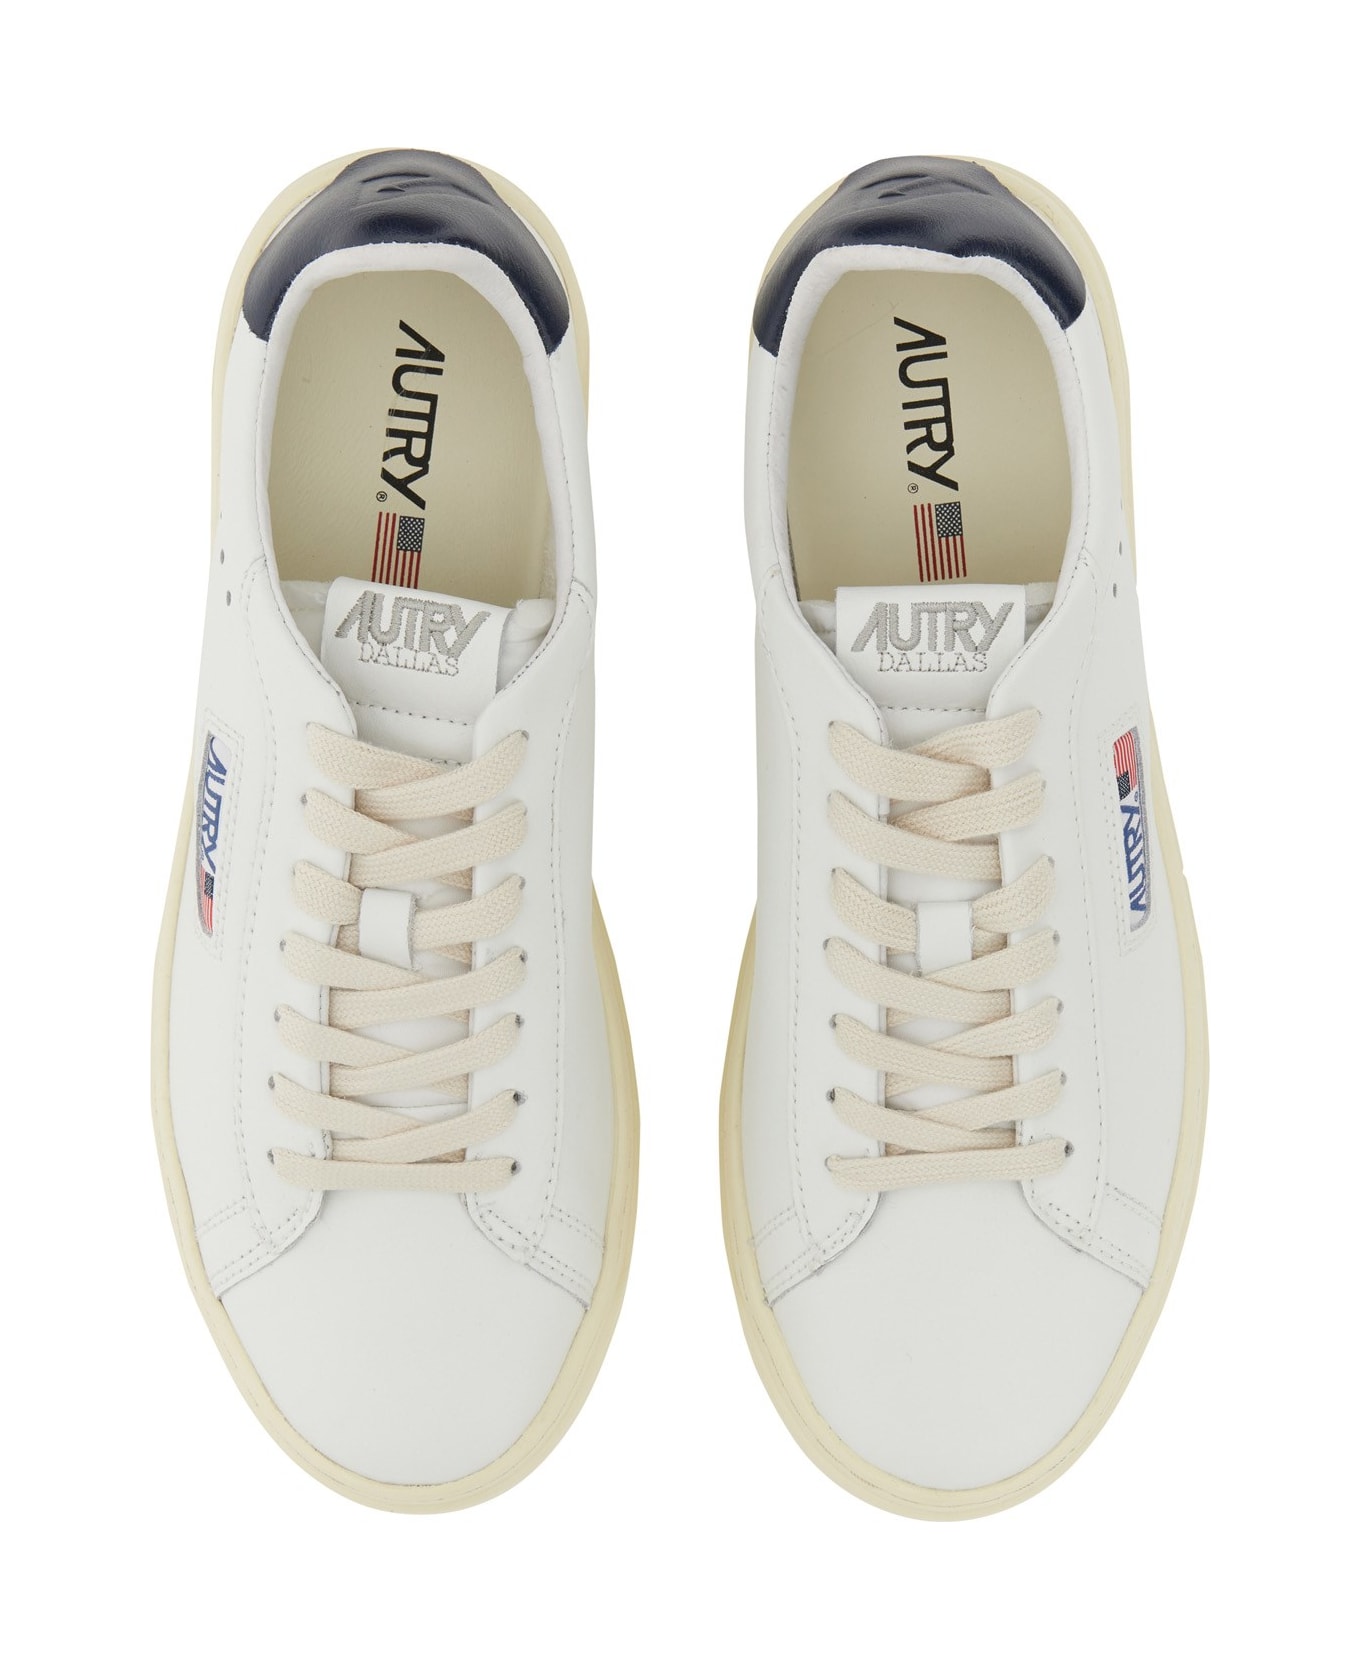 Autry White Leather Dallas Sneakers - NW05 スニーカー